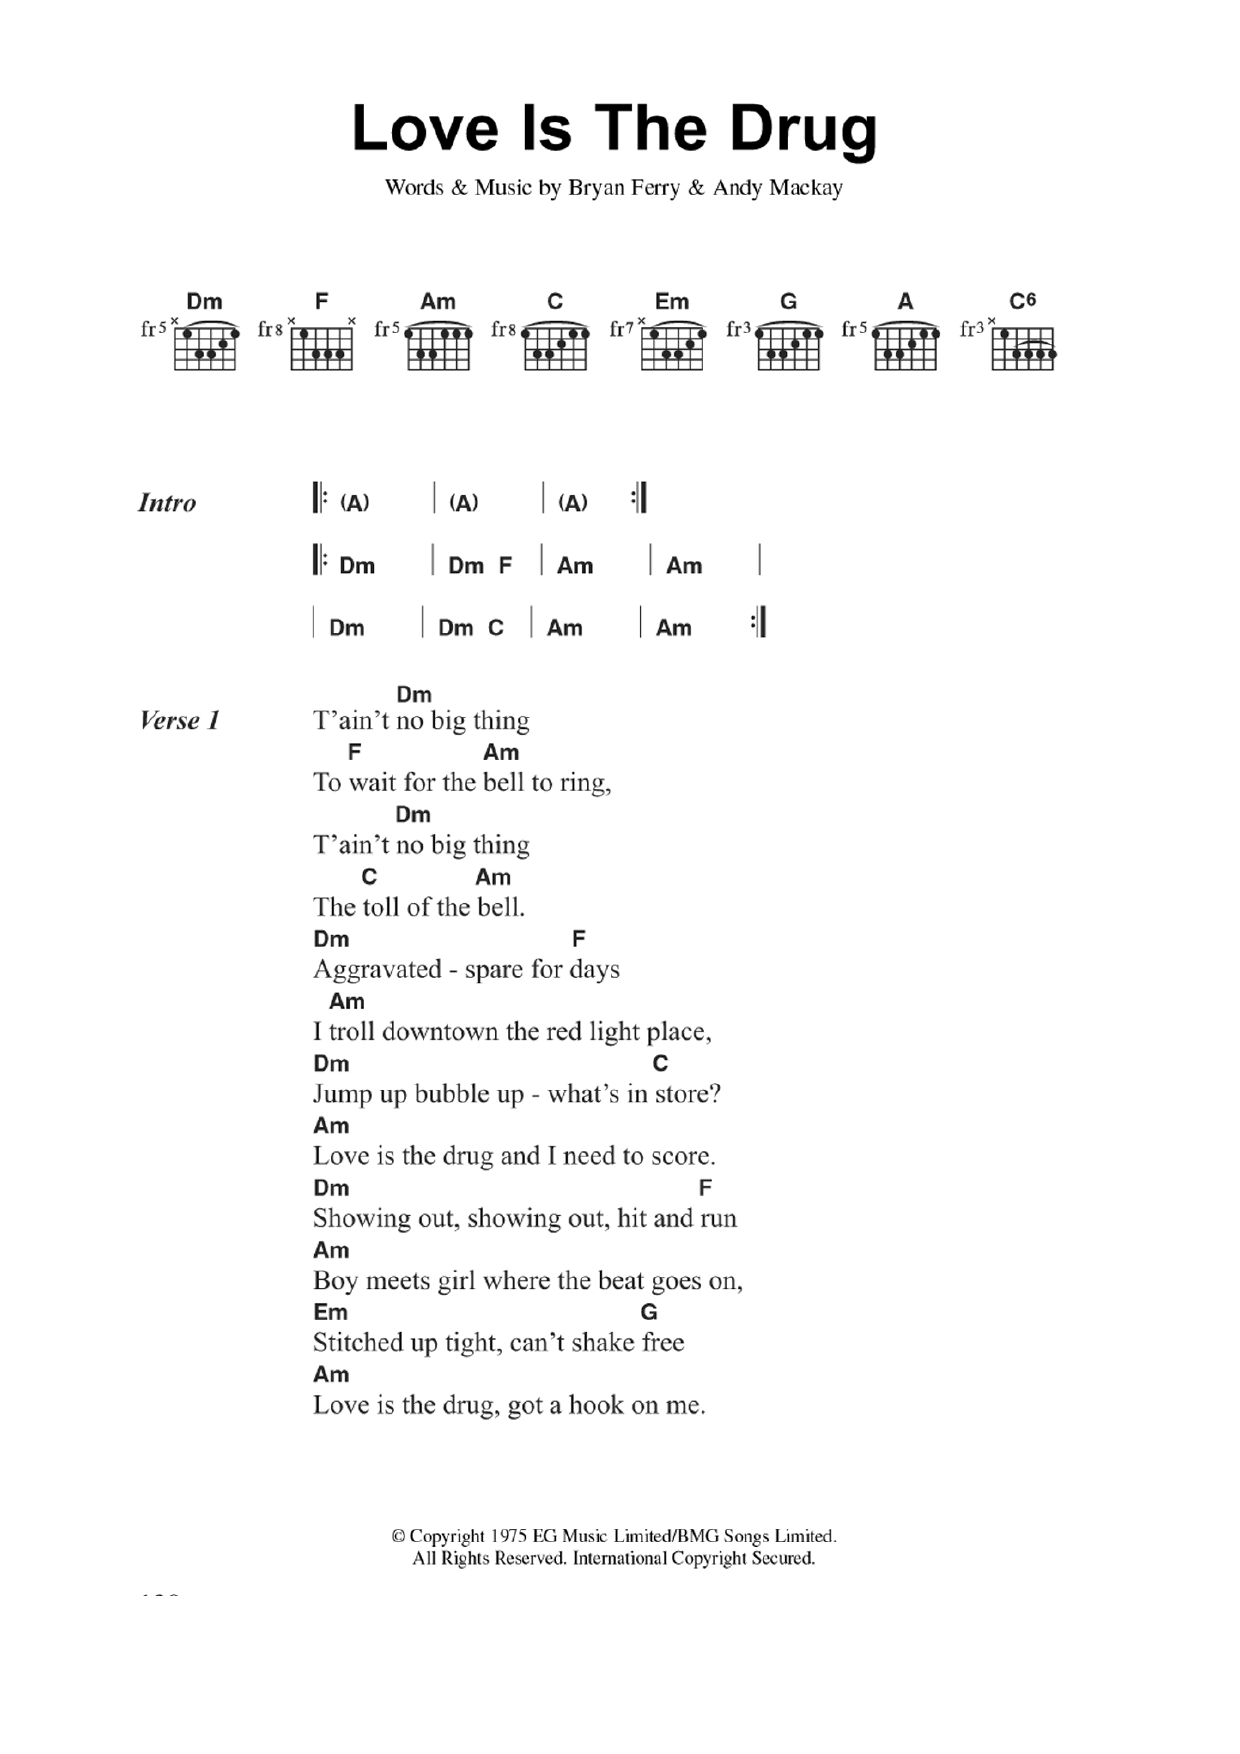 Download Roxy Music Love Is The Drug Sheet Music